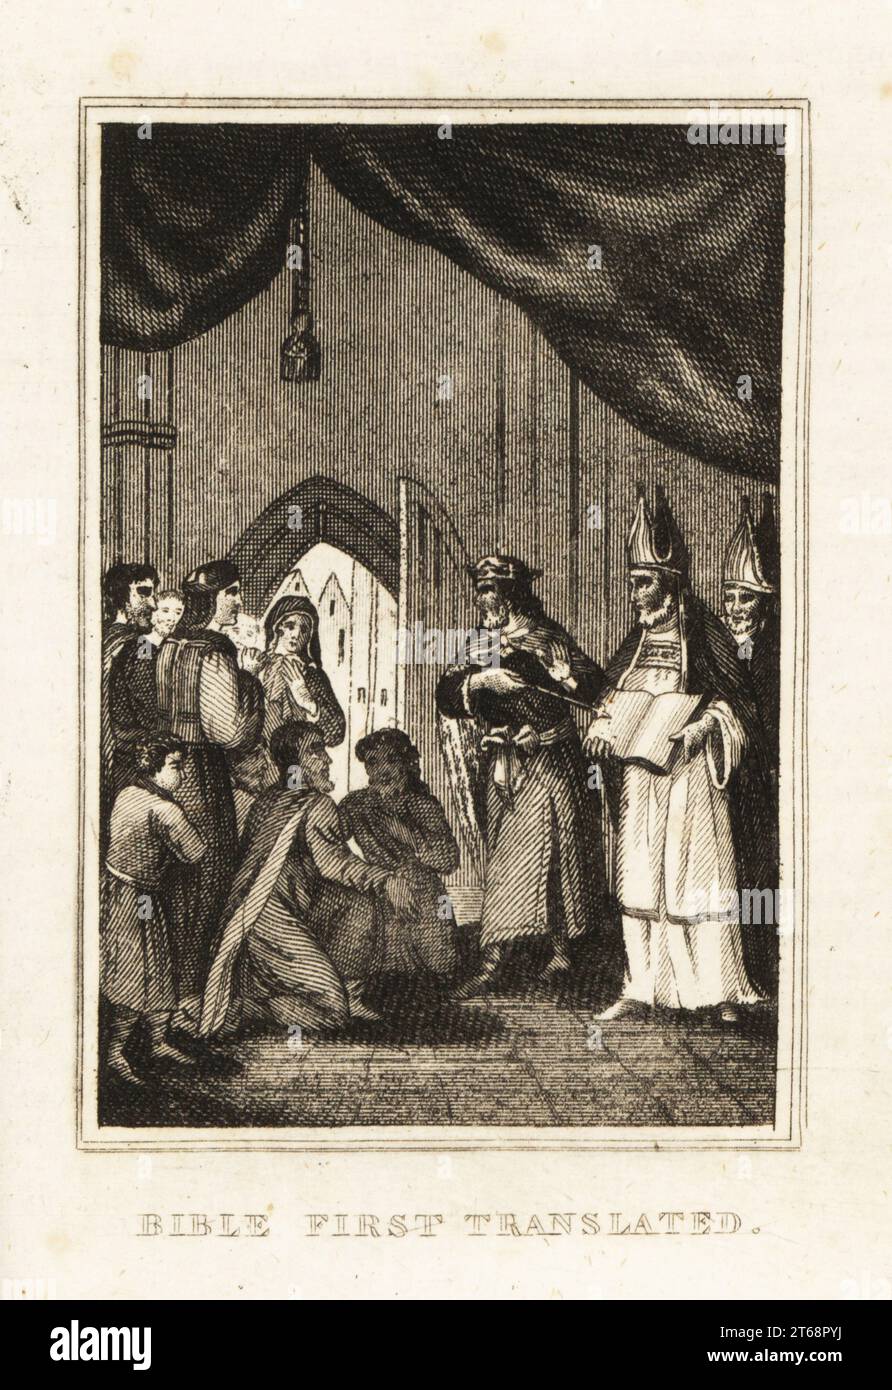 King Henry VIII and bishops presenting William Tyndale's first English translation of the Bible, 1525. Bible first translated. Copperplate engraving from M. A. Jones History of England from Julius Caesar to George IV, G. Virtue, 26 Ivy Lane, London, 1836. Stock Photo